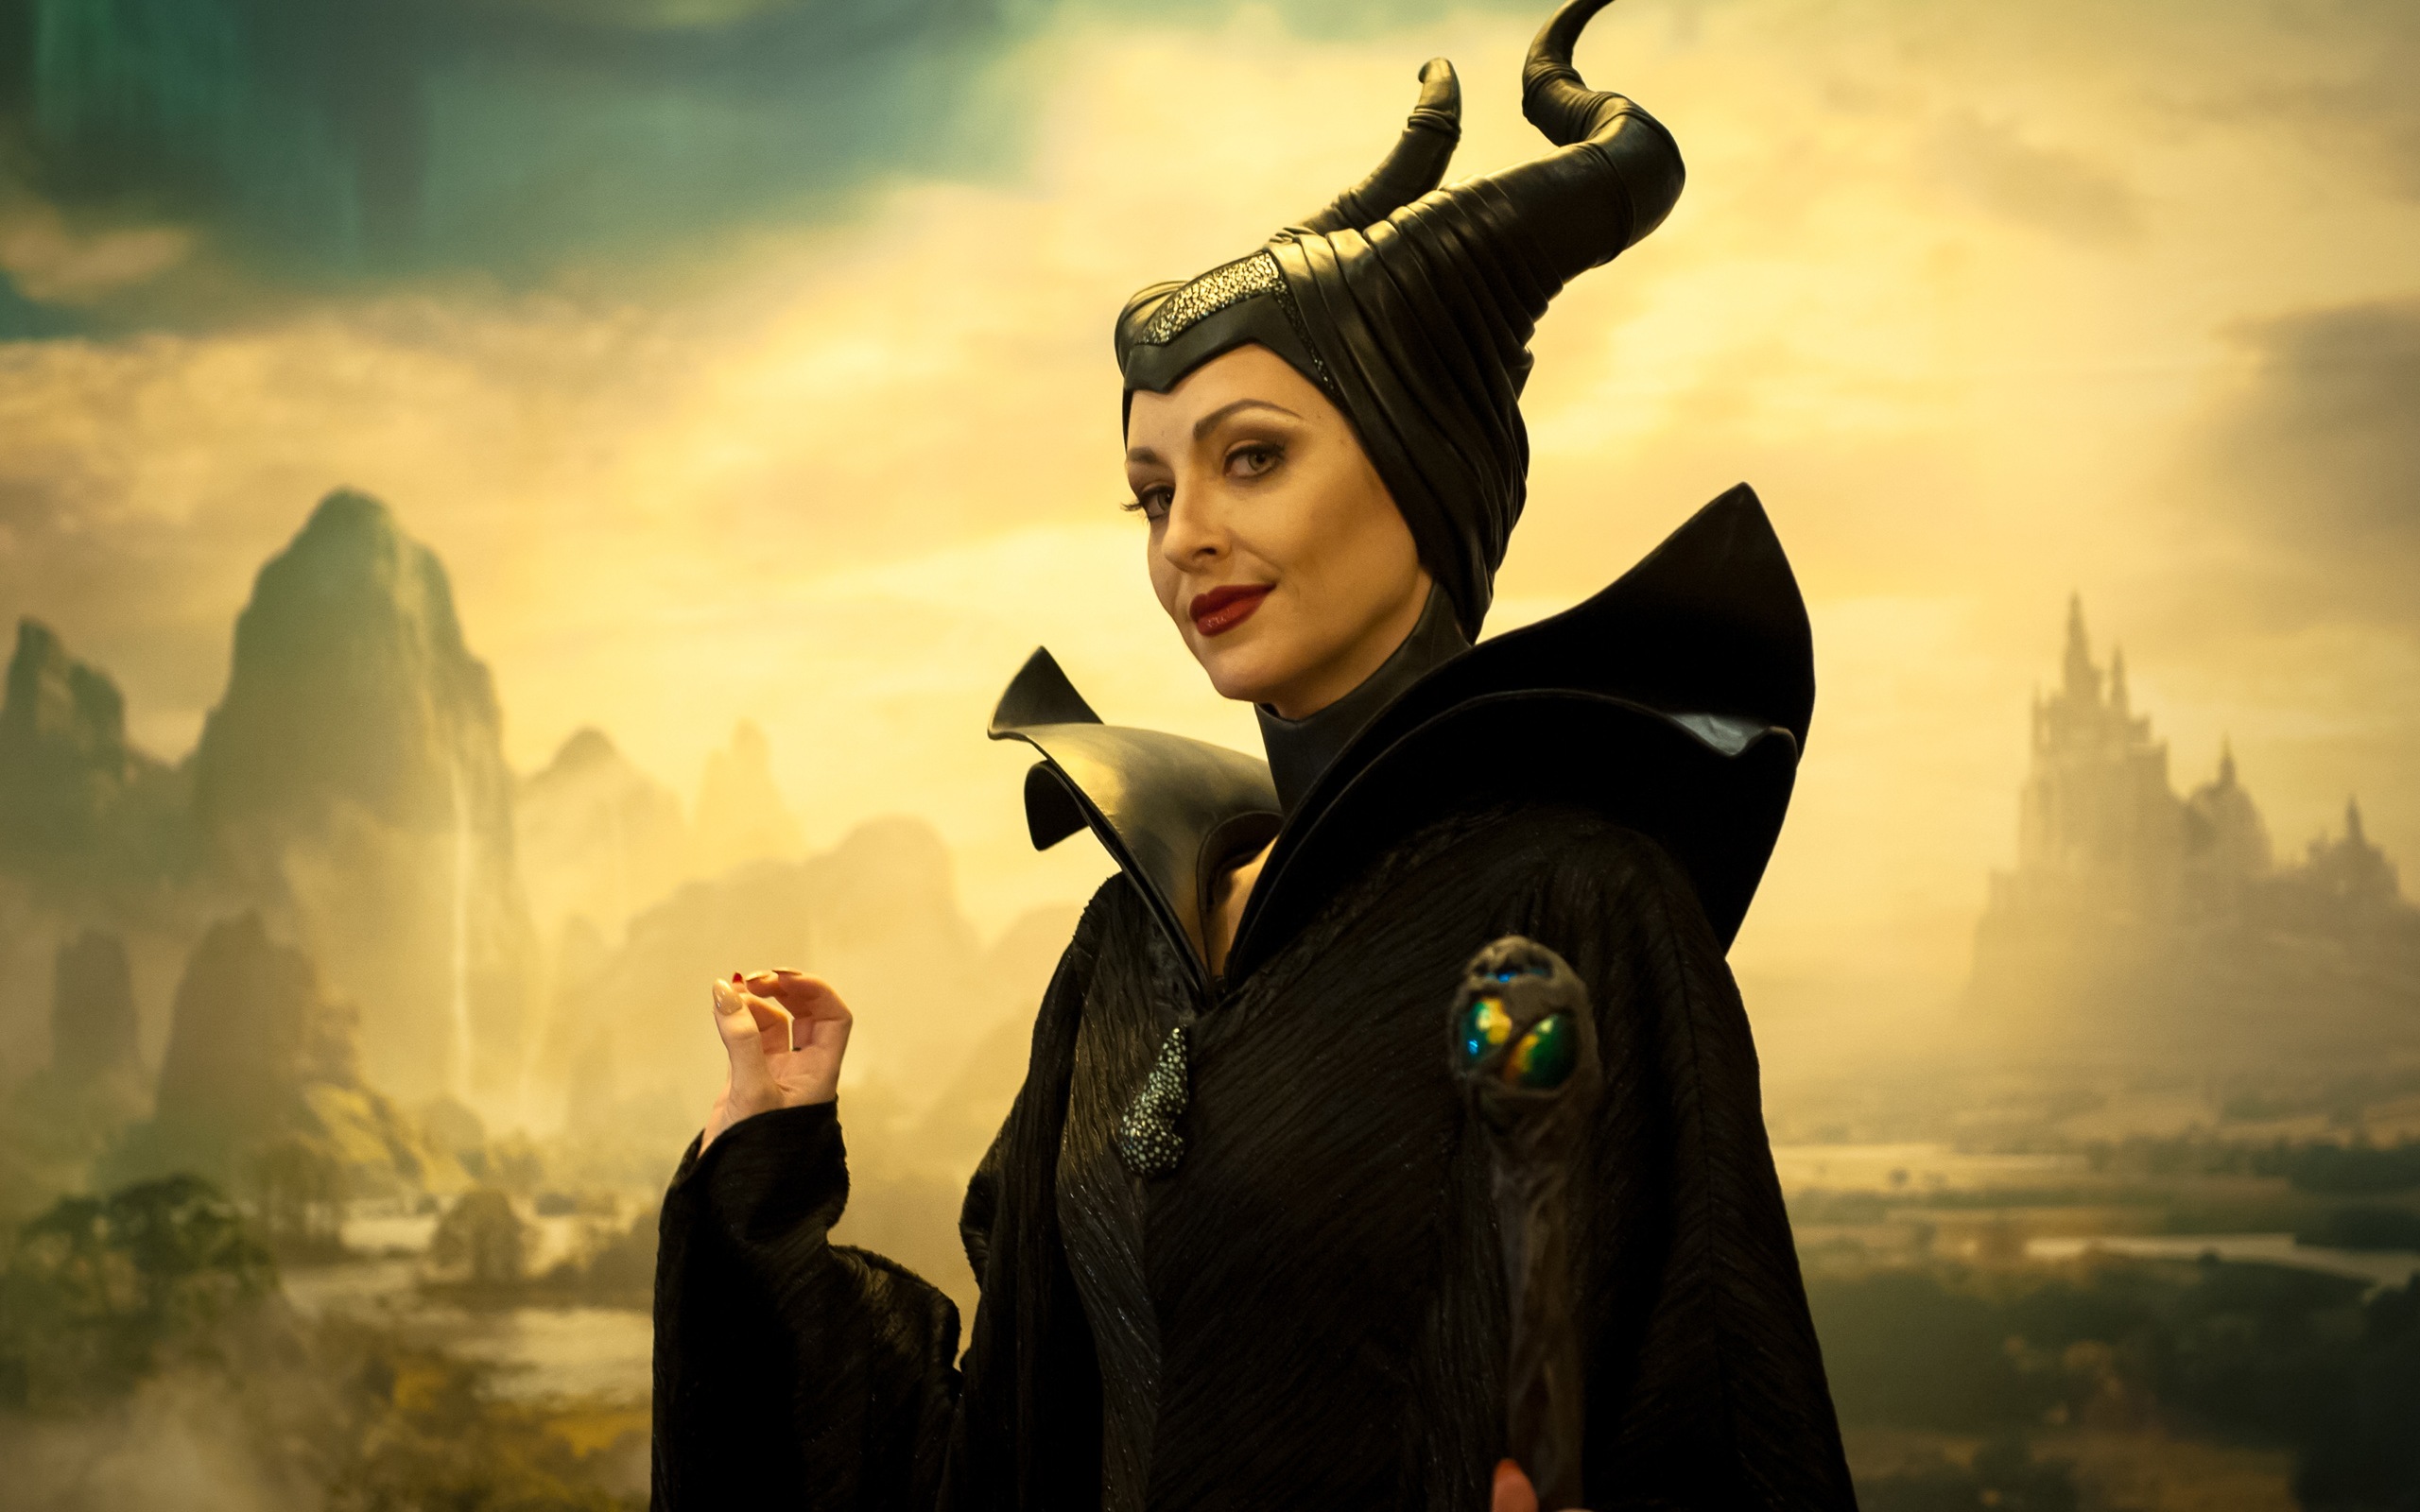 Maleficent 2014 HD movie wallpapers #11 - 2560x1600